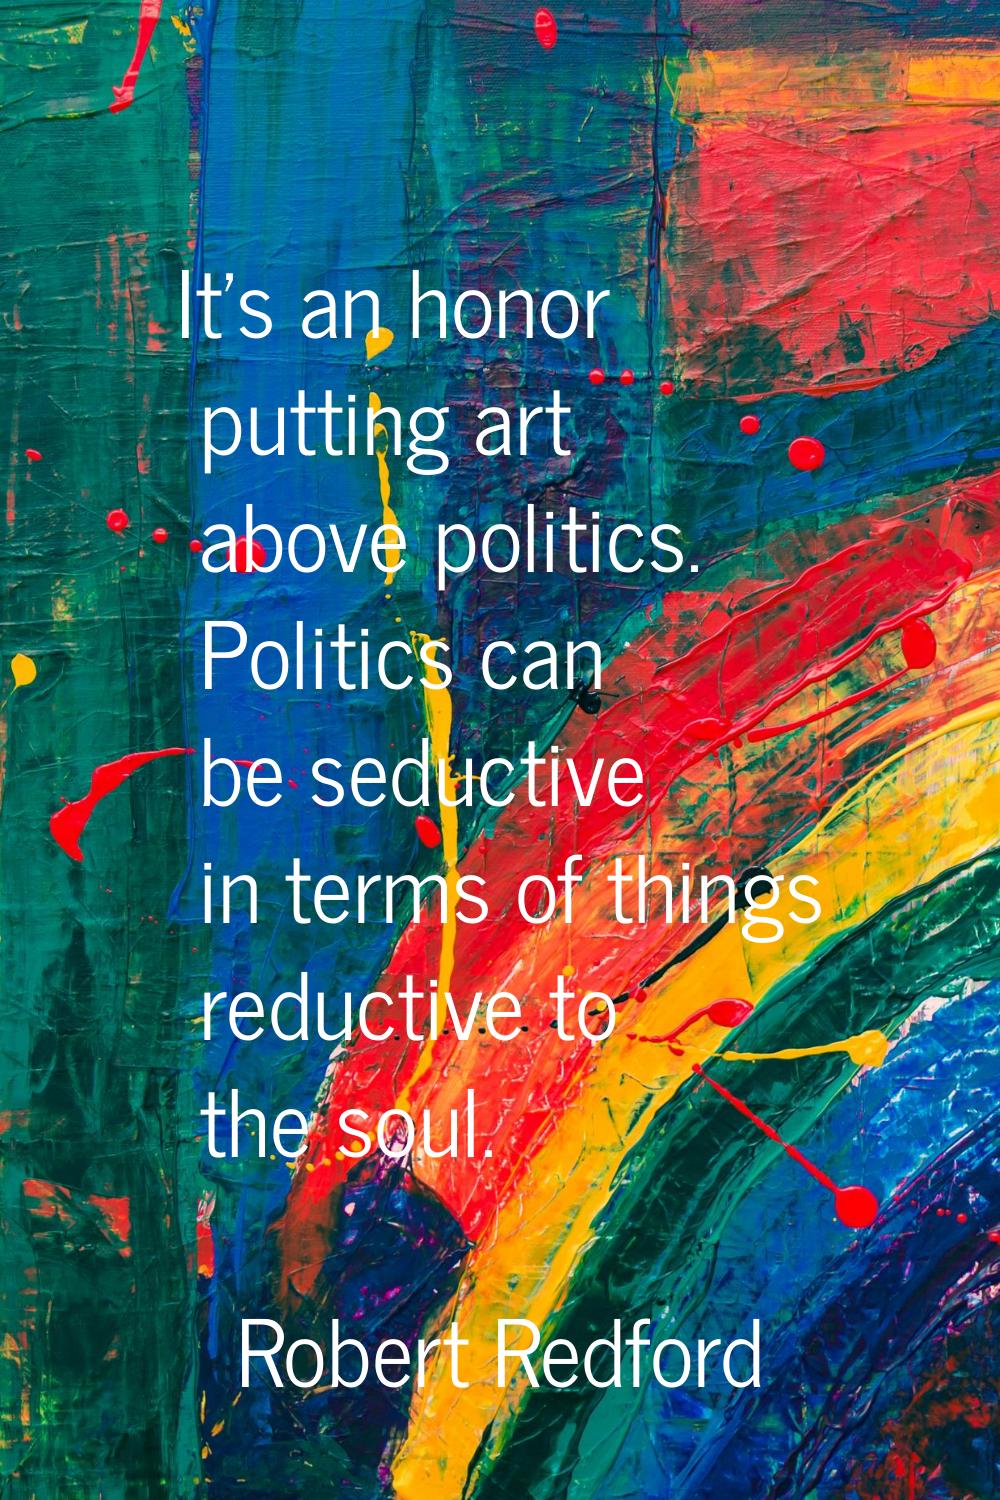 It's an honor putting art above politics. Politics can be seductive in terms of things reductive to